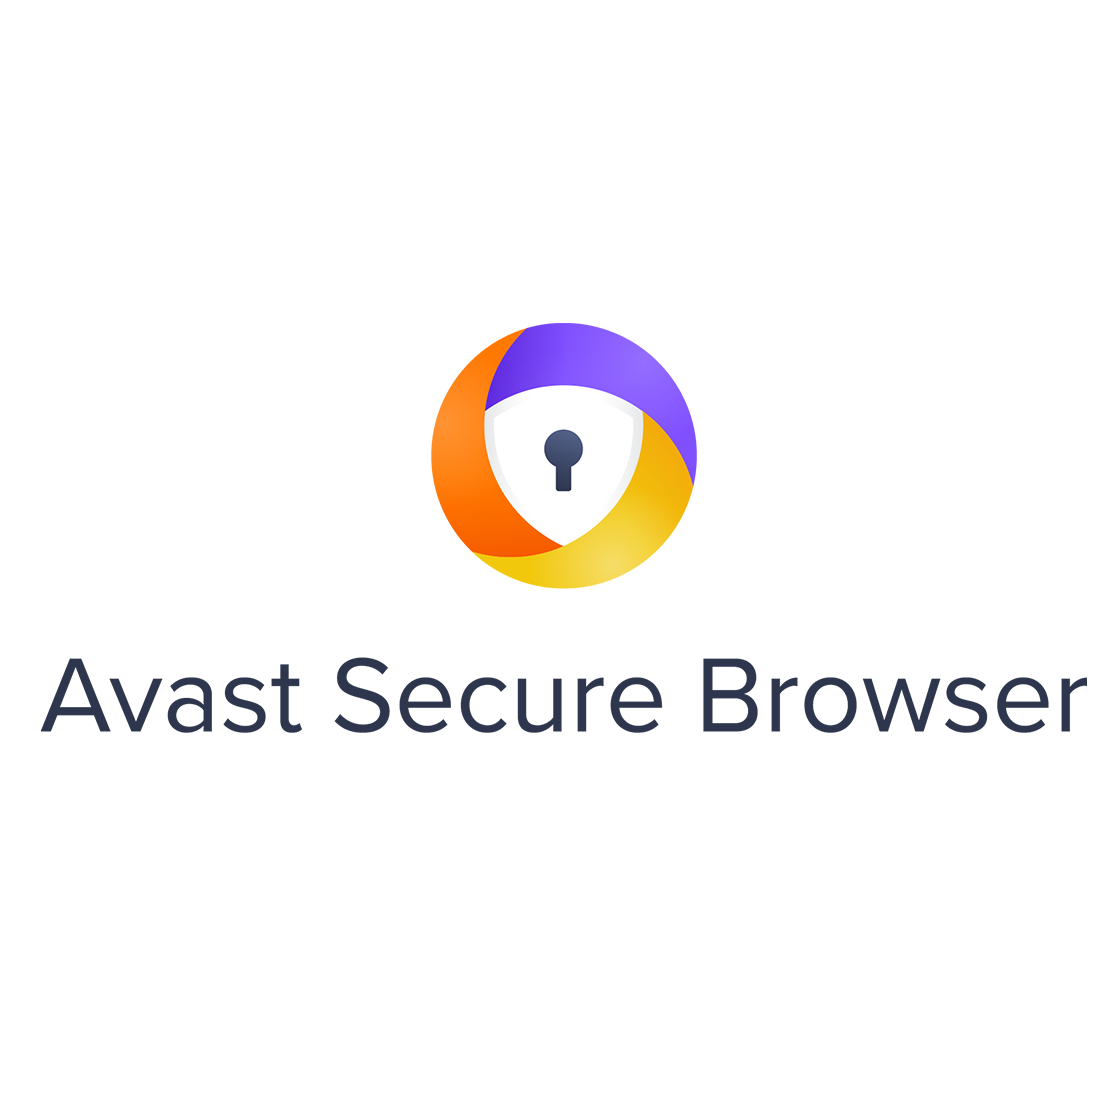 Avast Secure Browser Proxy Integration